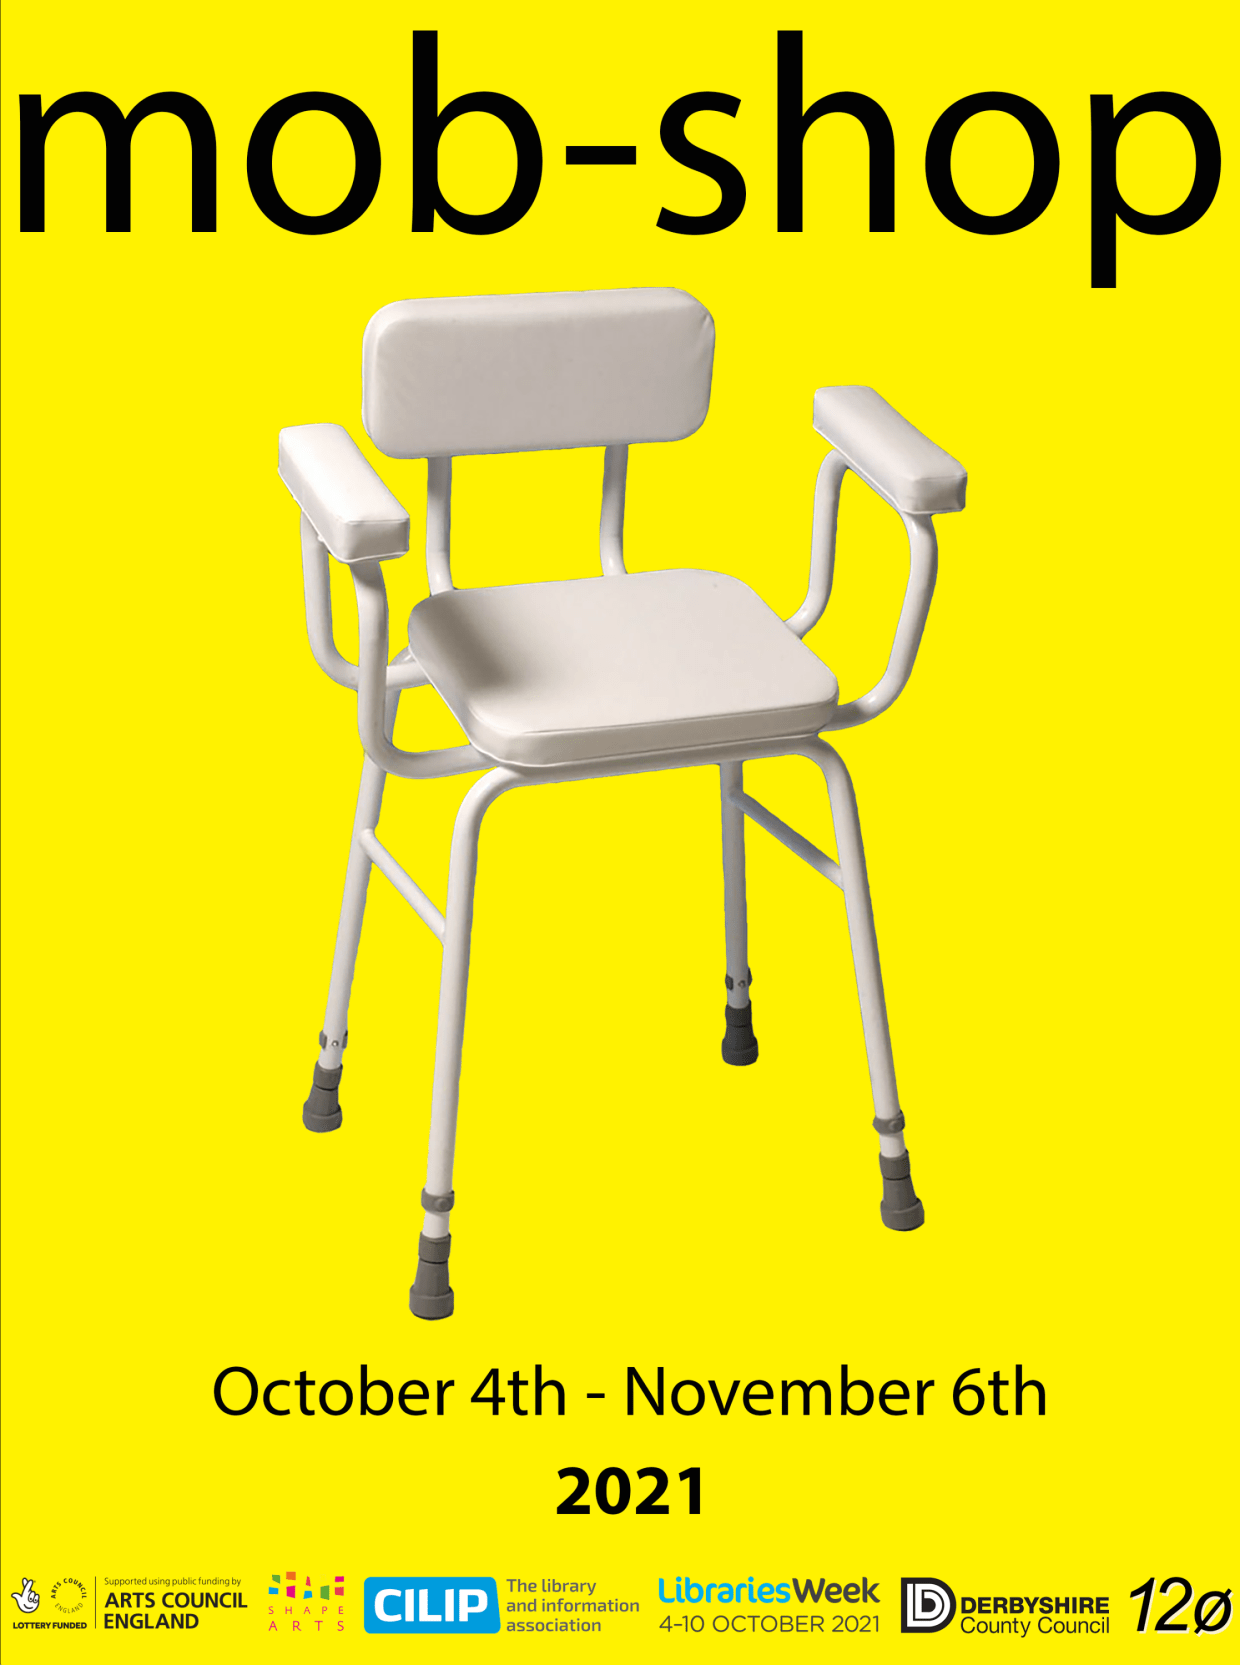 The words mob-shop in black text fills the top of the image on a bright yellow background. Central to the image is a cream leather chair with metal frame. Below reads: October 4th - November 6th 2021.